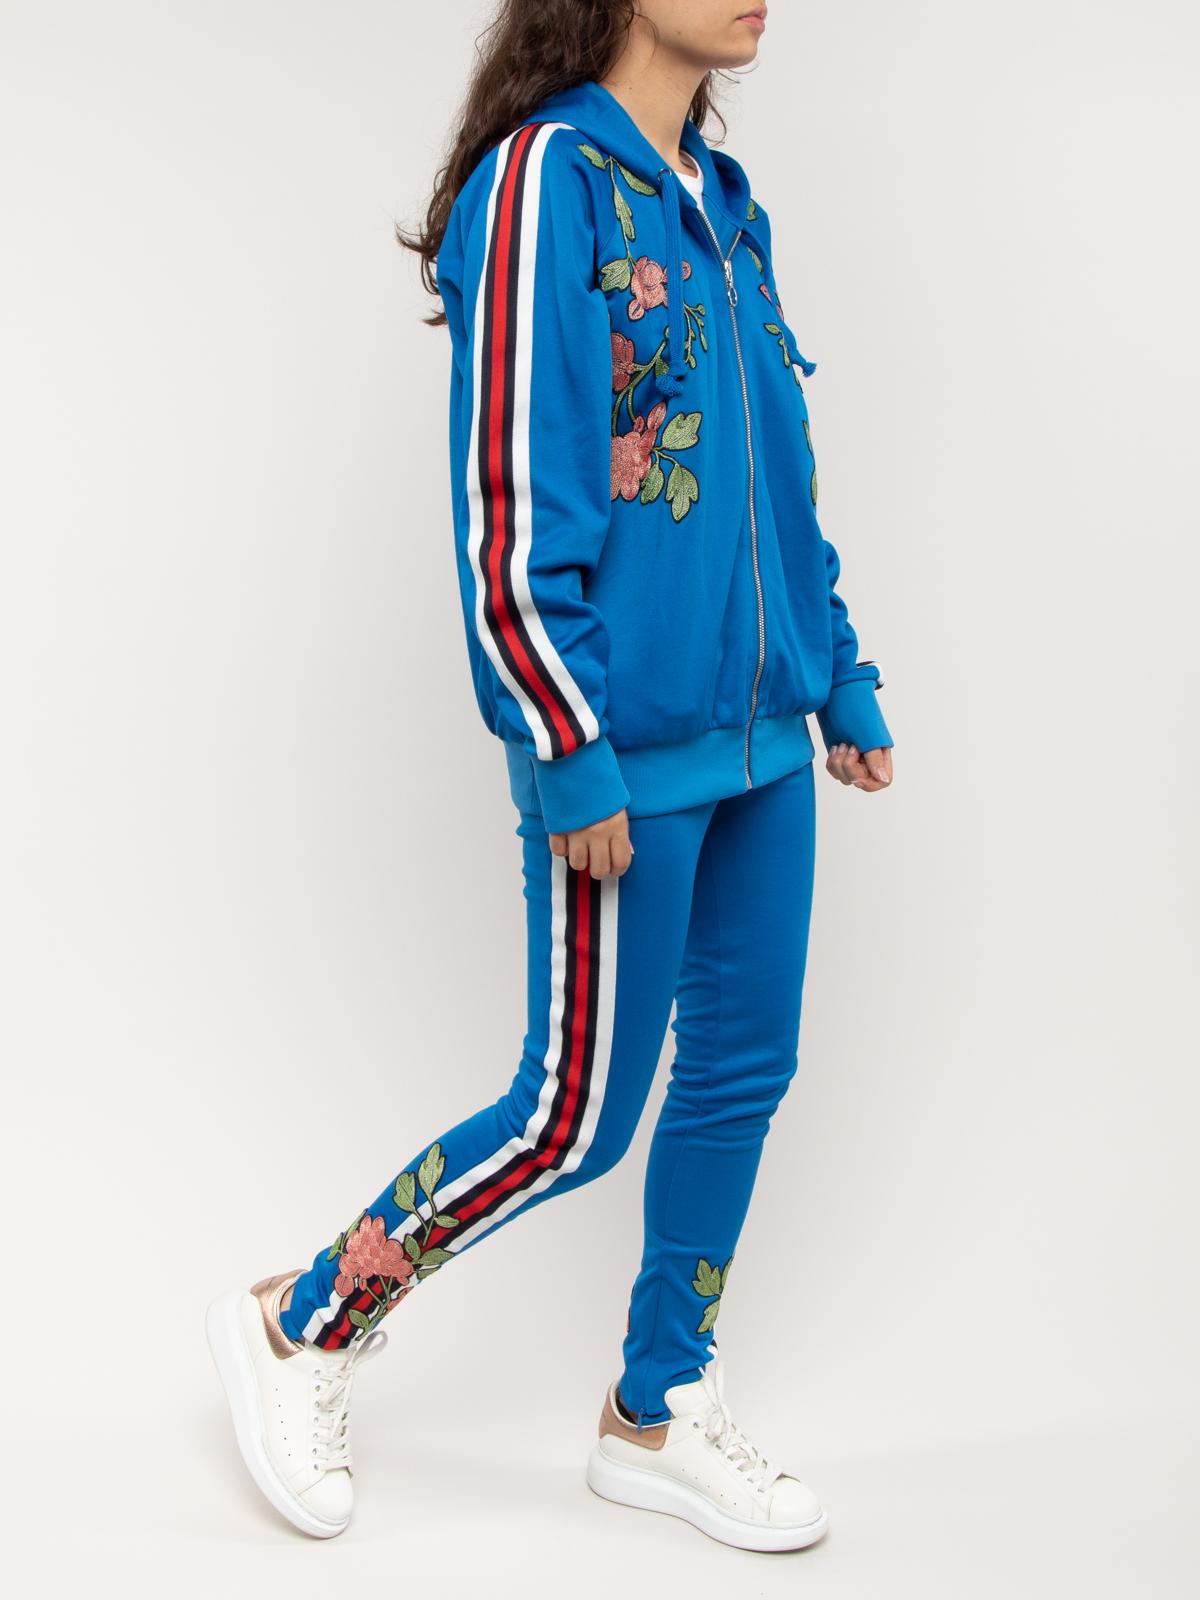 gucci tiger track suit